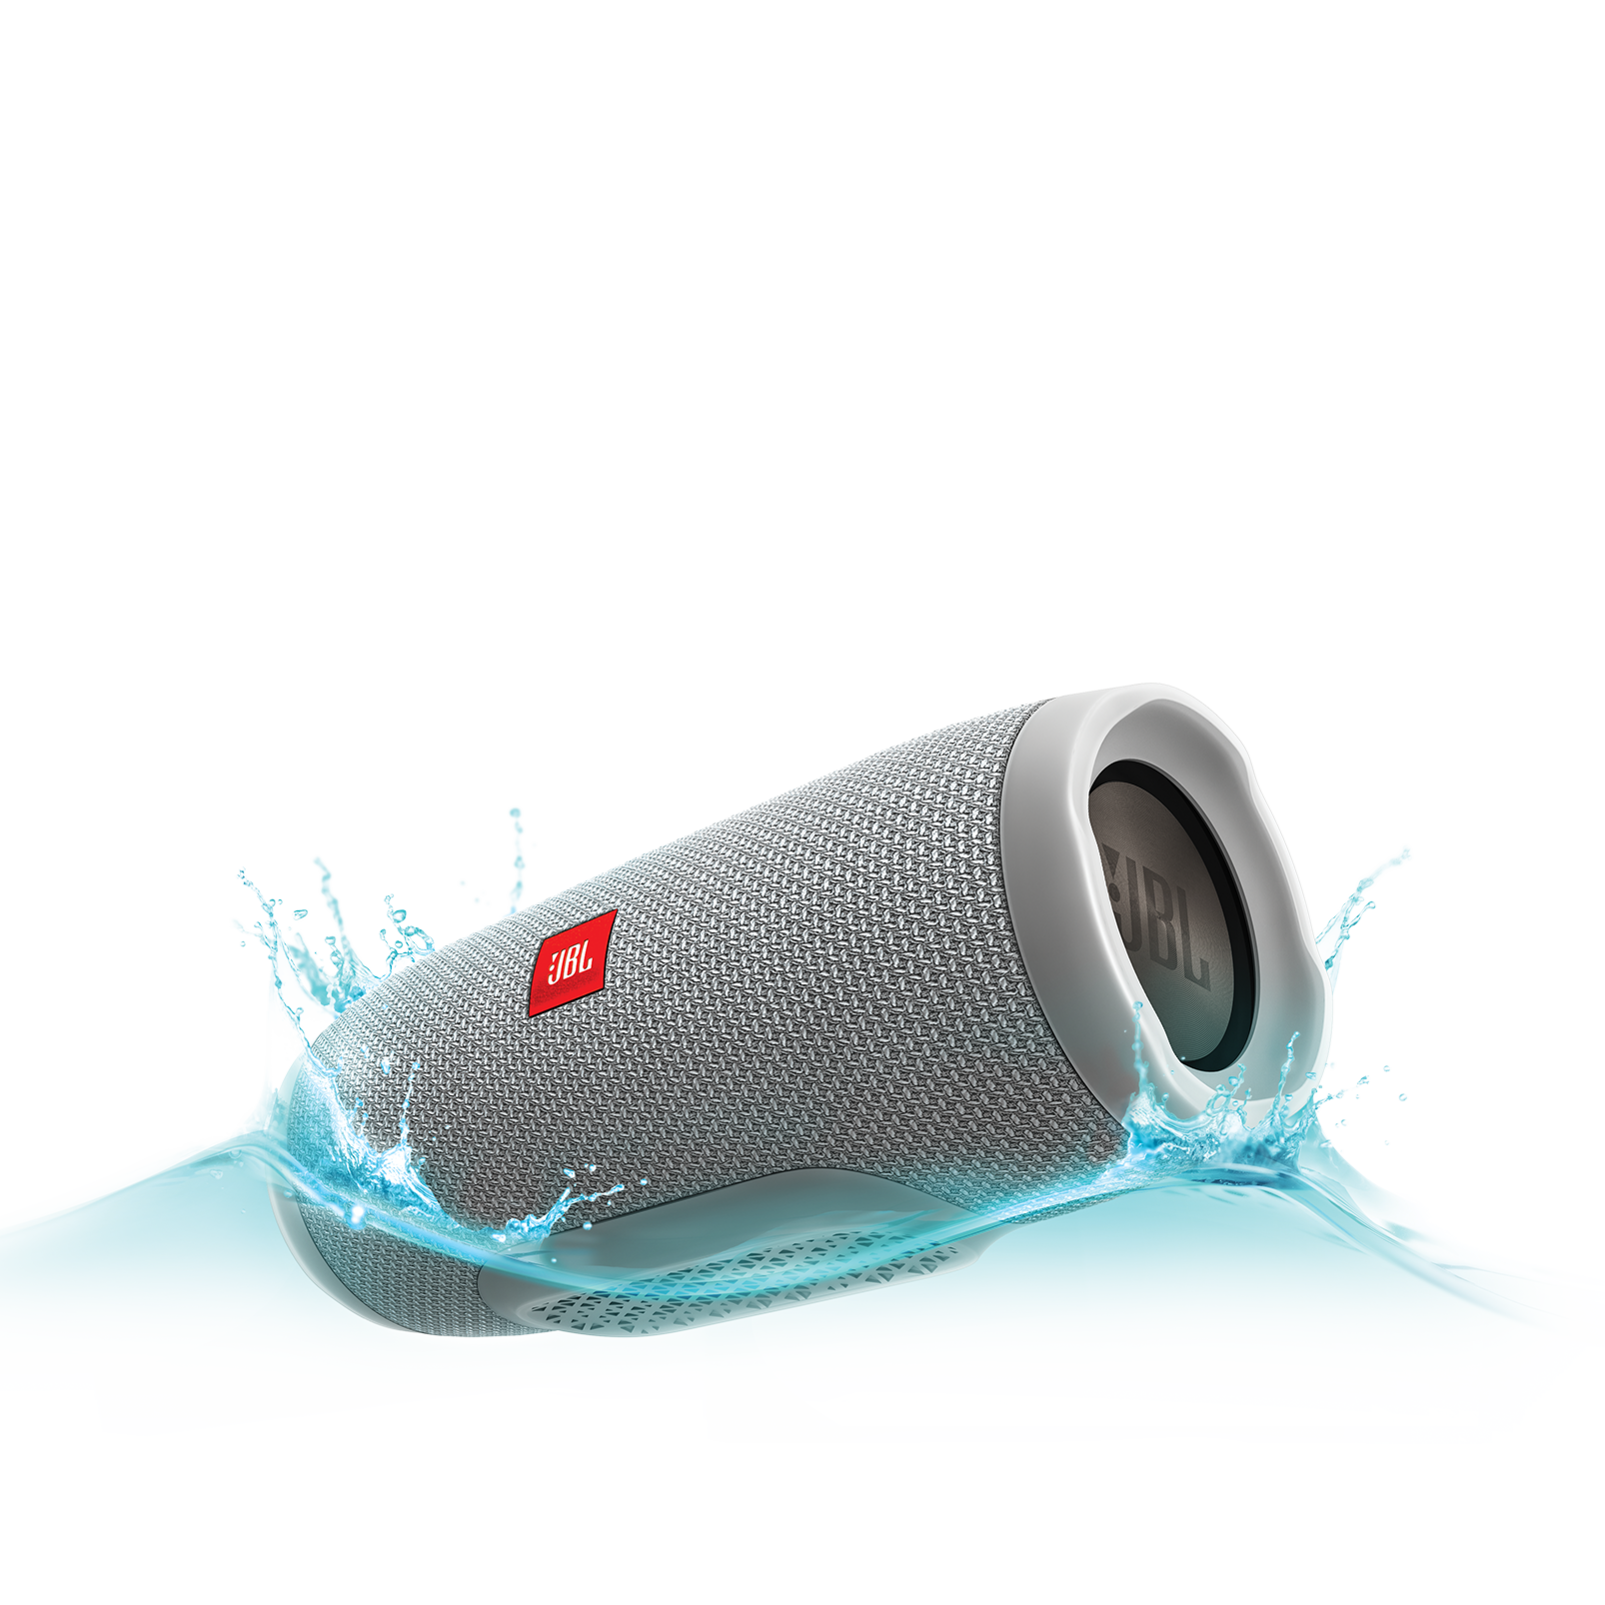 Save $50 on the Charge 3. Full-Featured Waterproof Portable Speaker with High-Capacity Battery to Charge Your Devices. Sale price $99.95. Shop now.